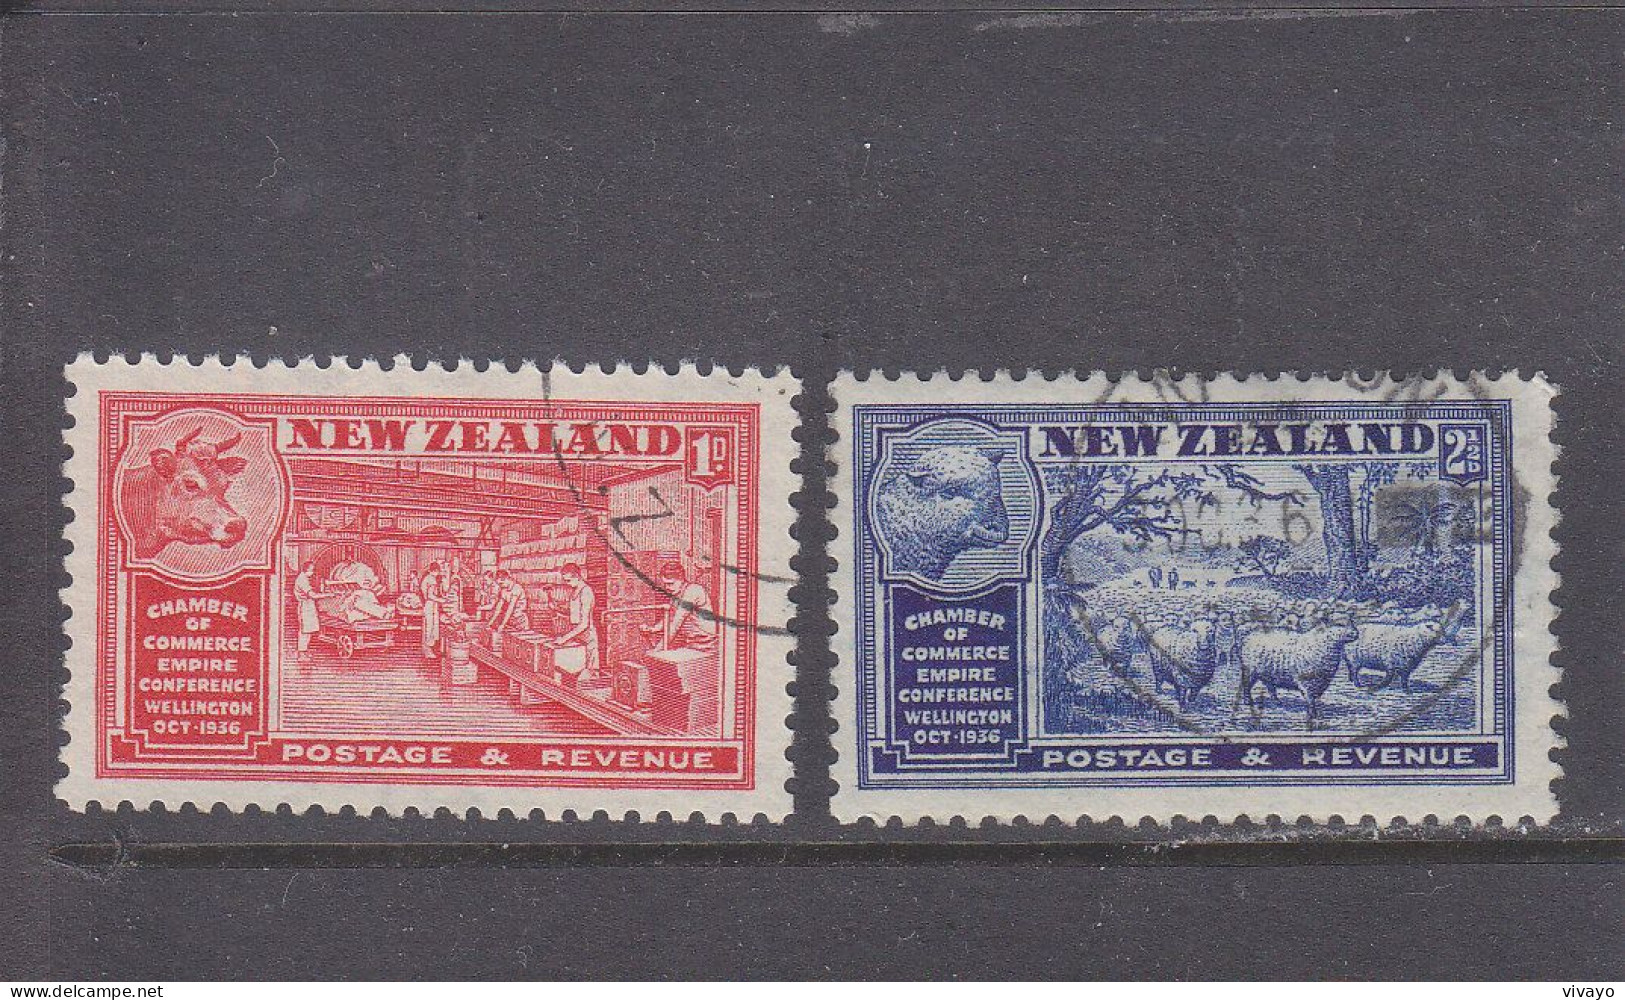 NEW ZEALAND - O / FINE CANCELLED - 1936 - BUTTER , SHEEP -  Yv. 228, 229  - Mi. 227, 228 - Used Stamps